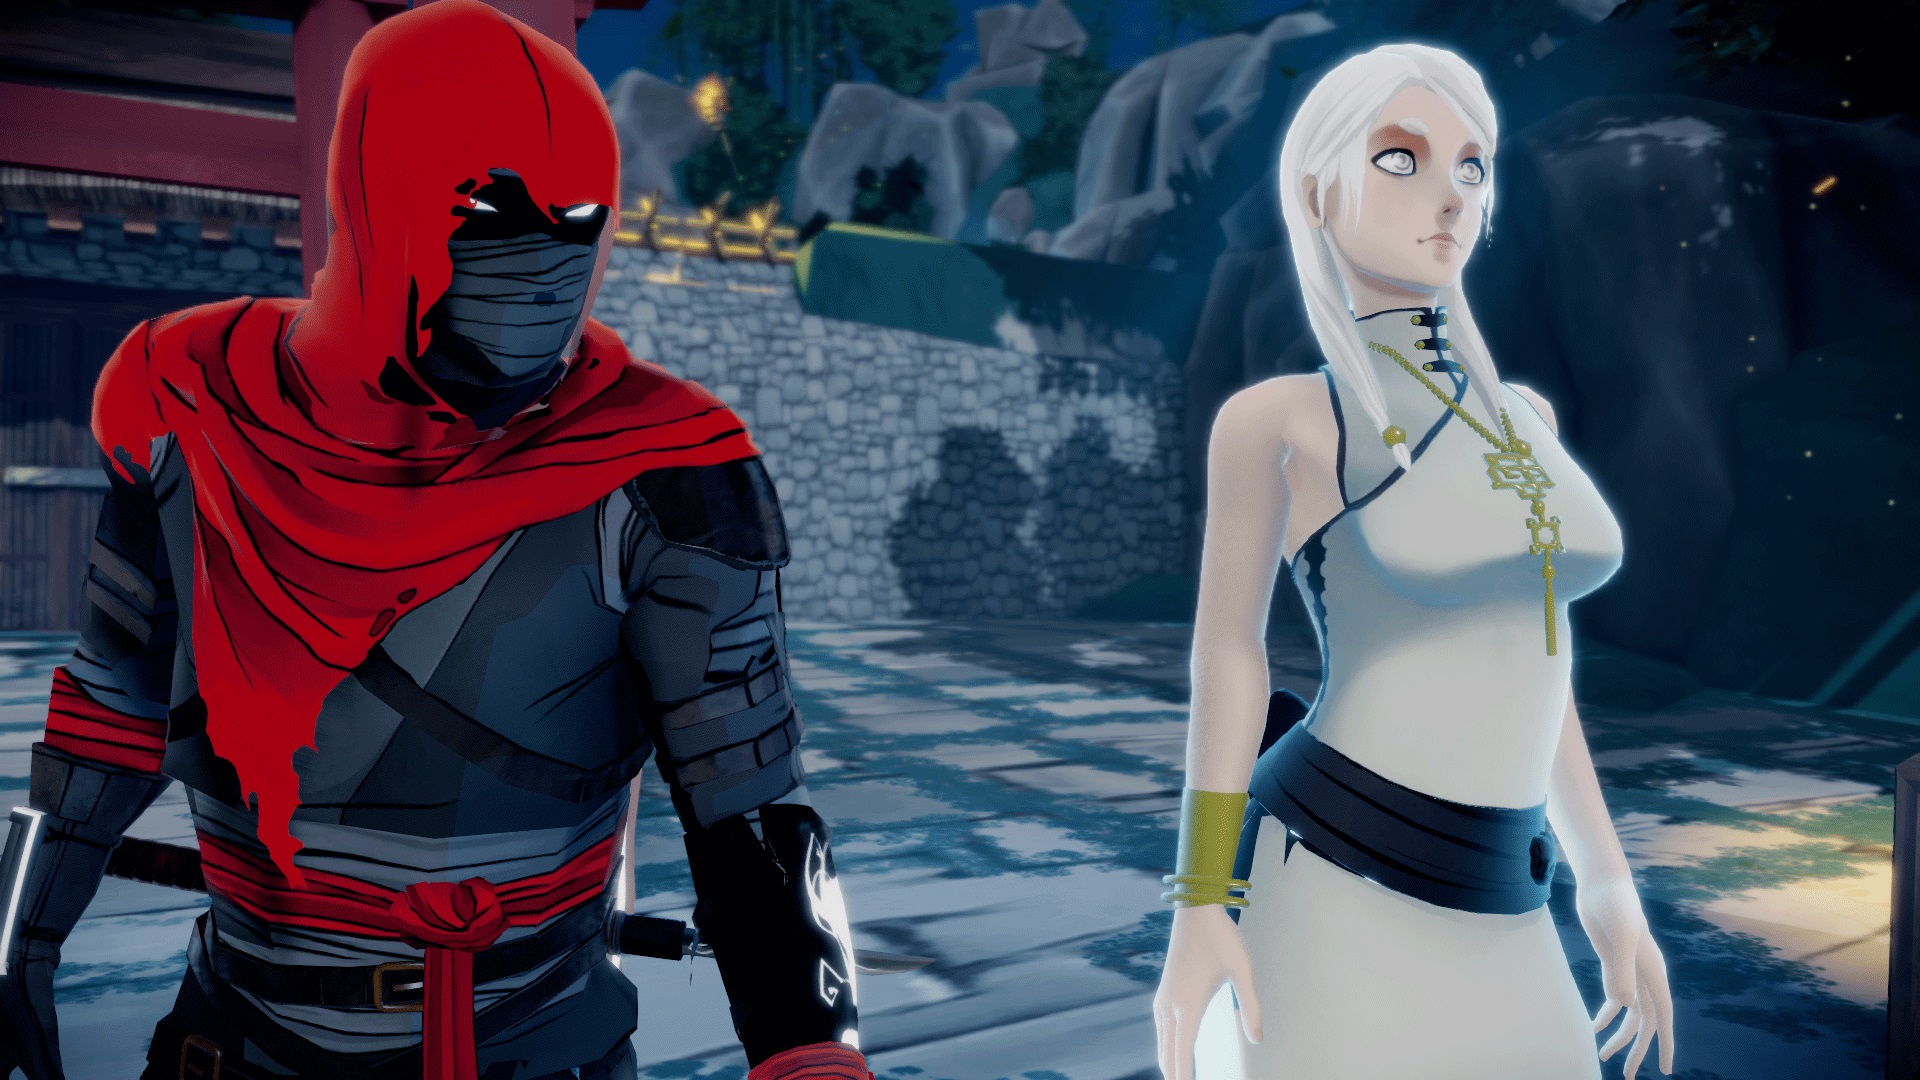 Aragami: Shadow Edition Announced for PC, PS4, and Xbox One